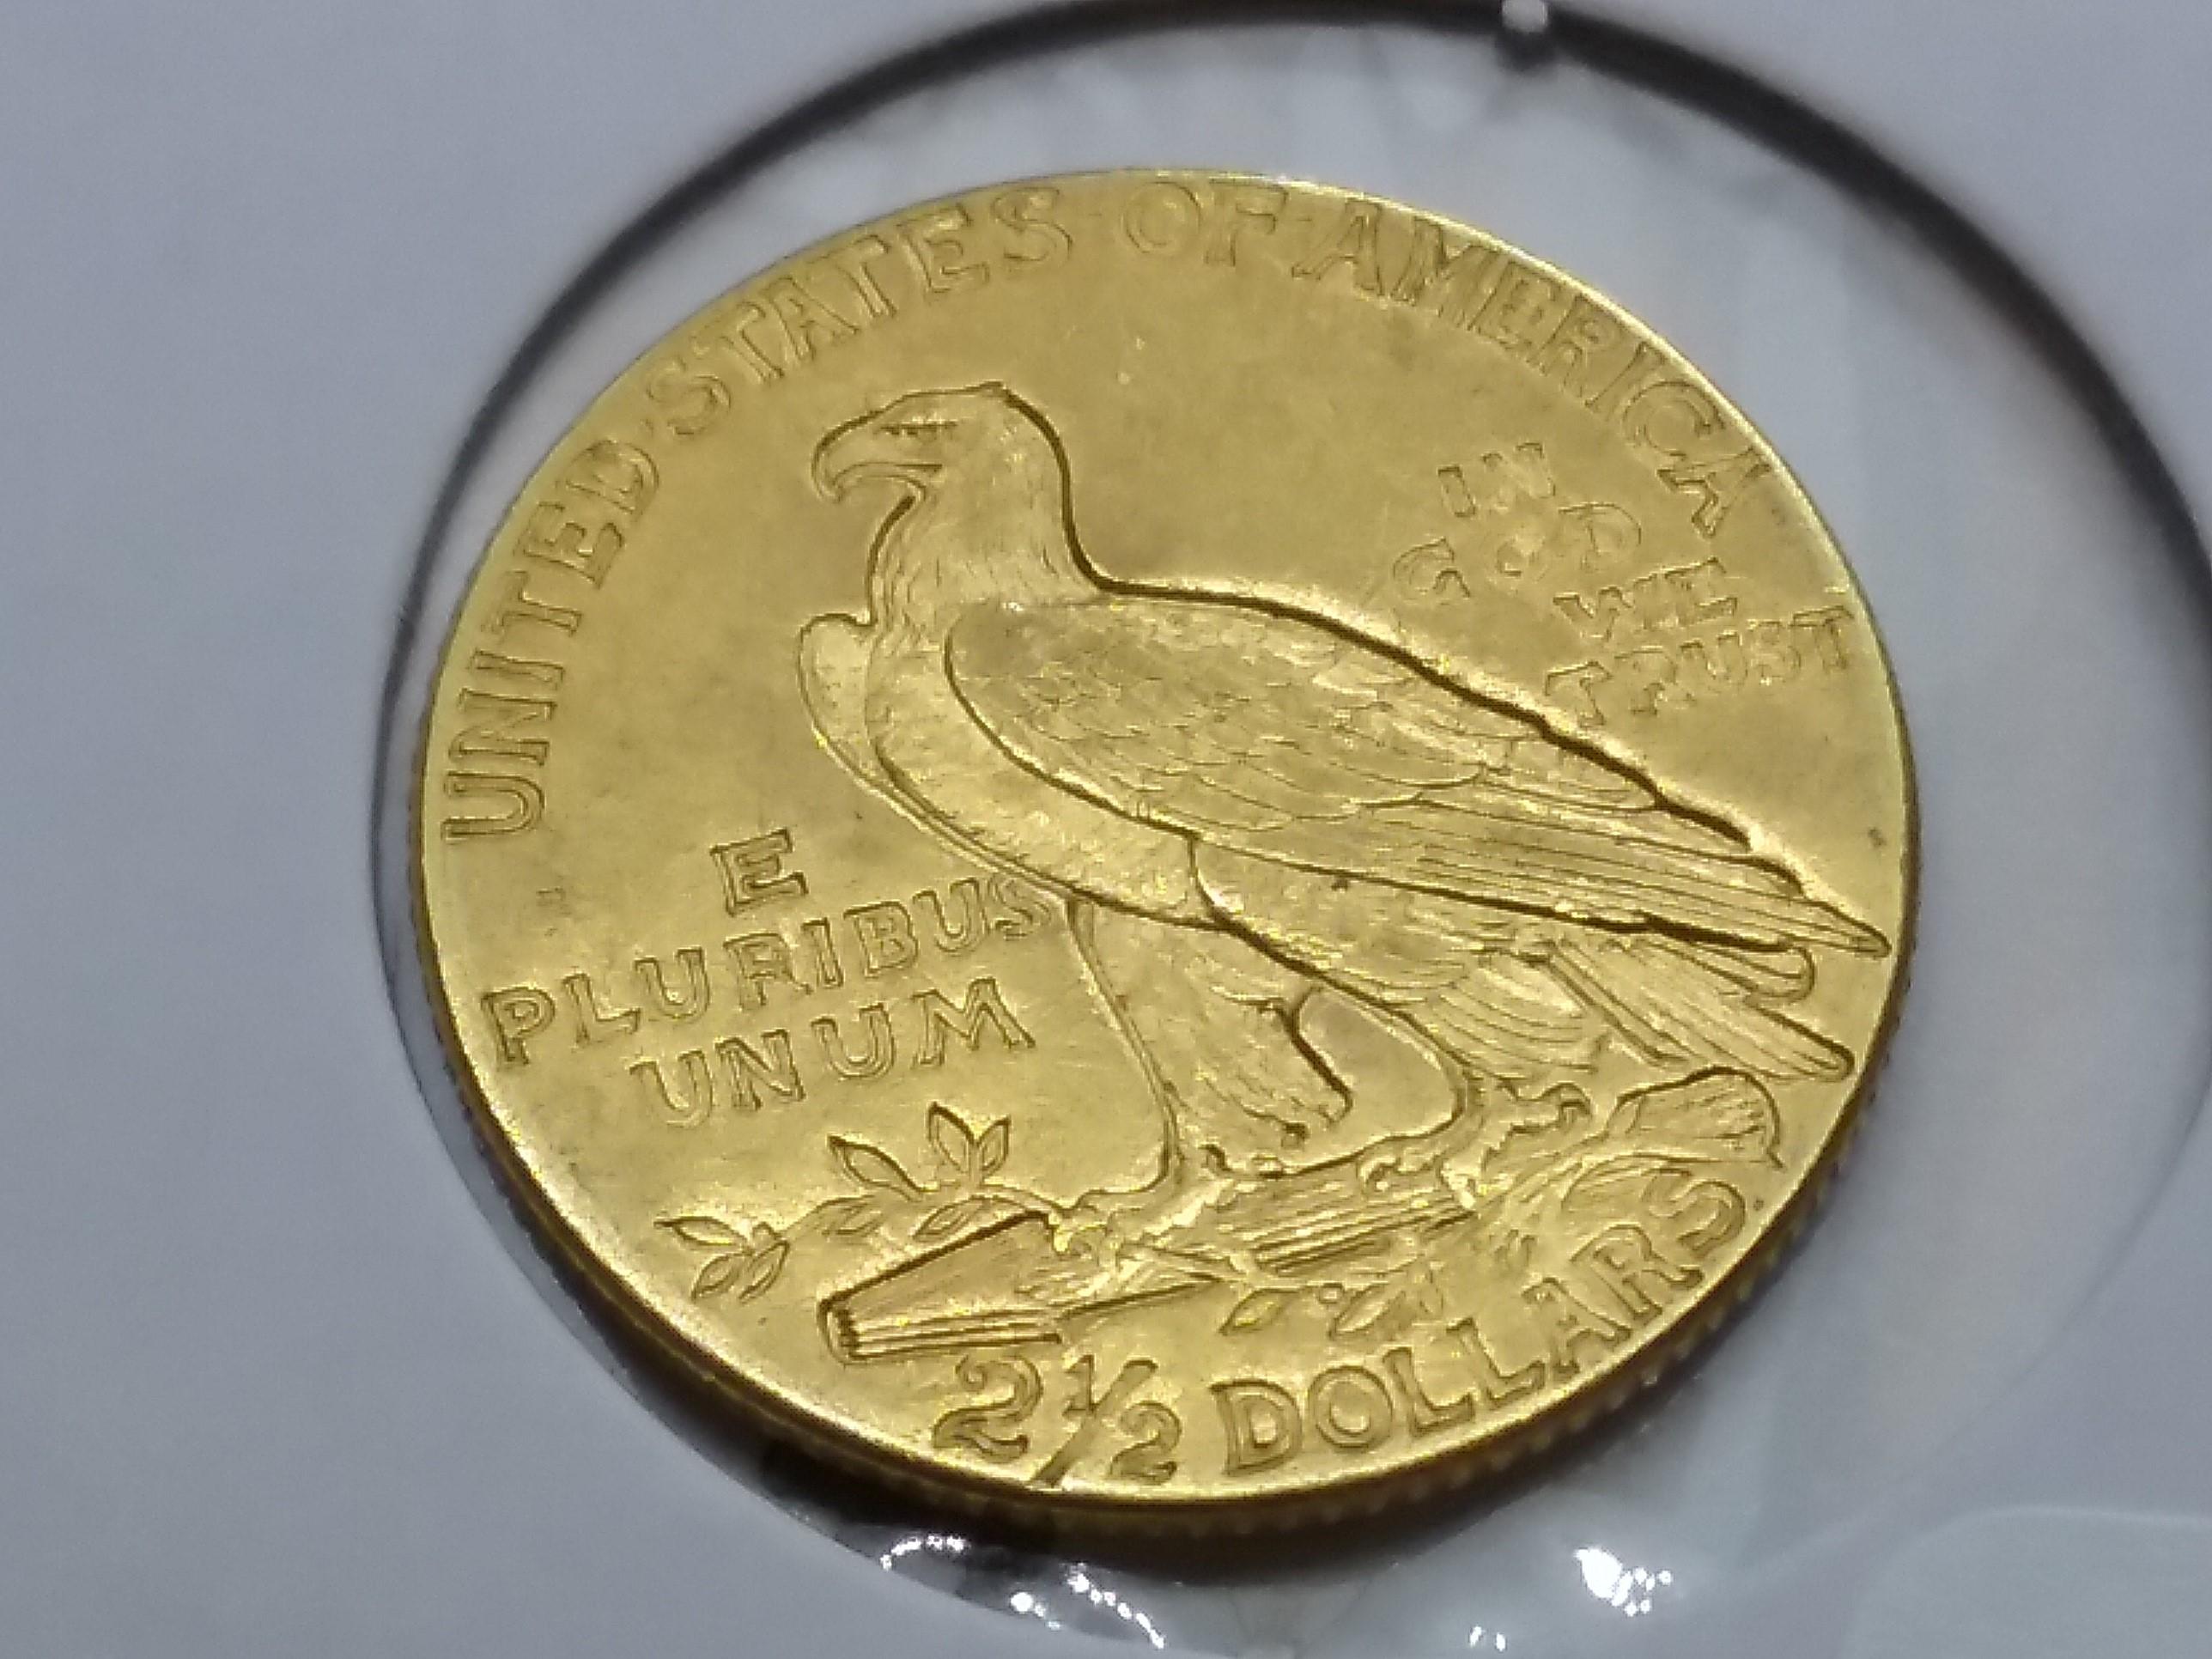 GOLD! 1913 Indian $2.5 dollar in About Uncirculated plus condition